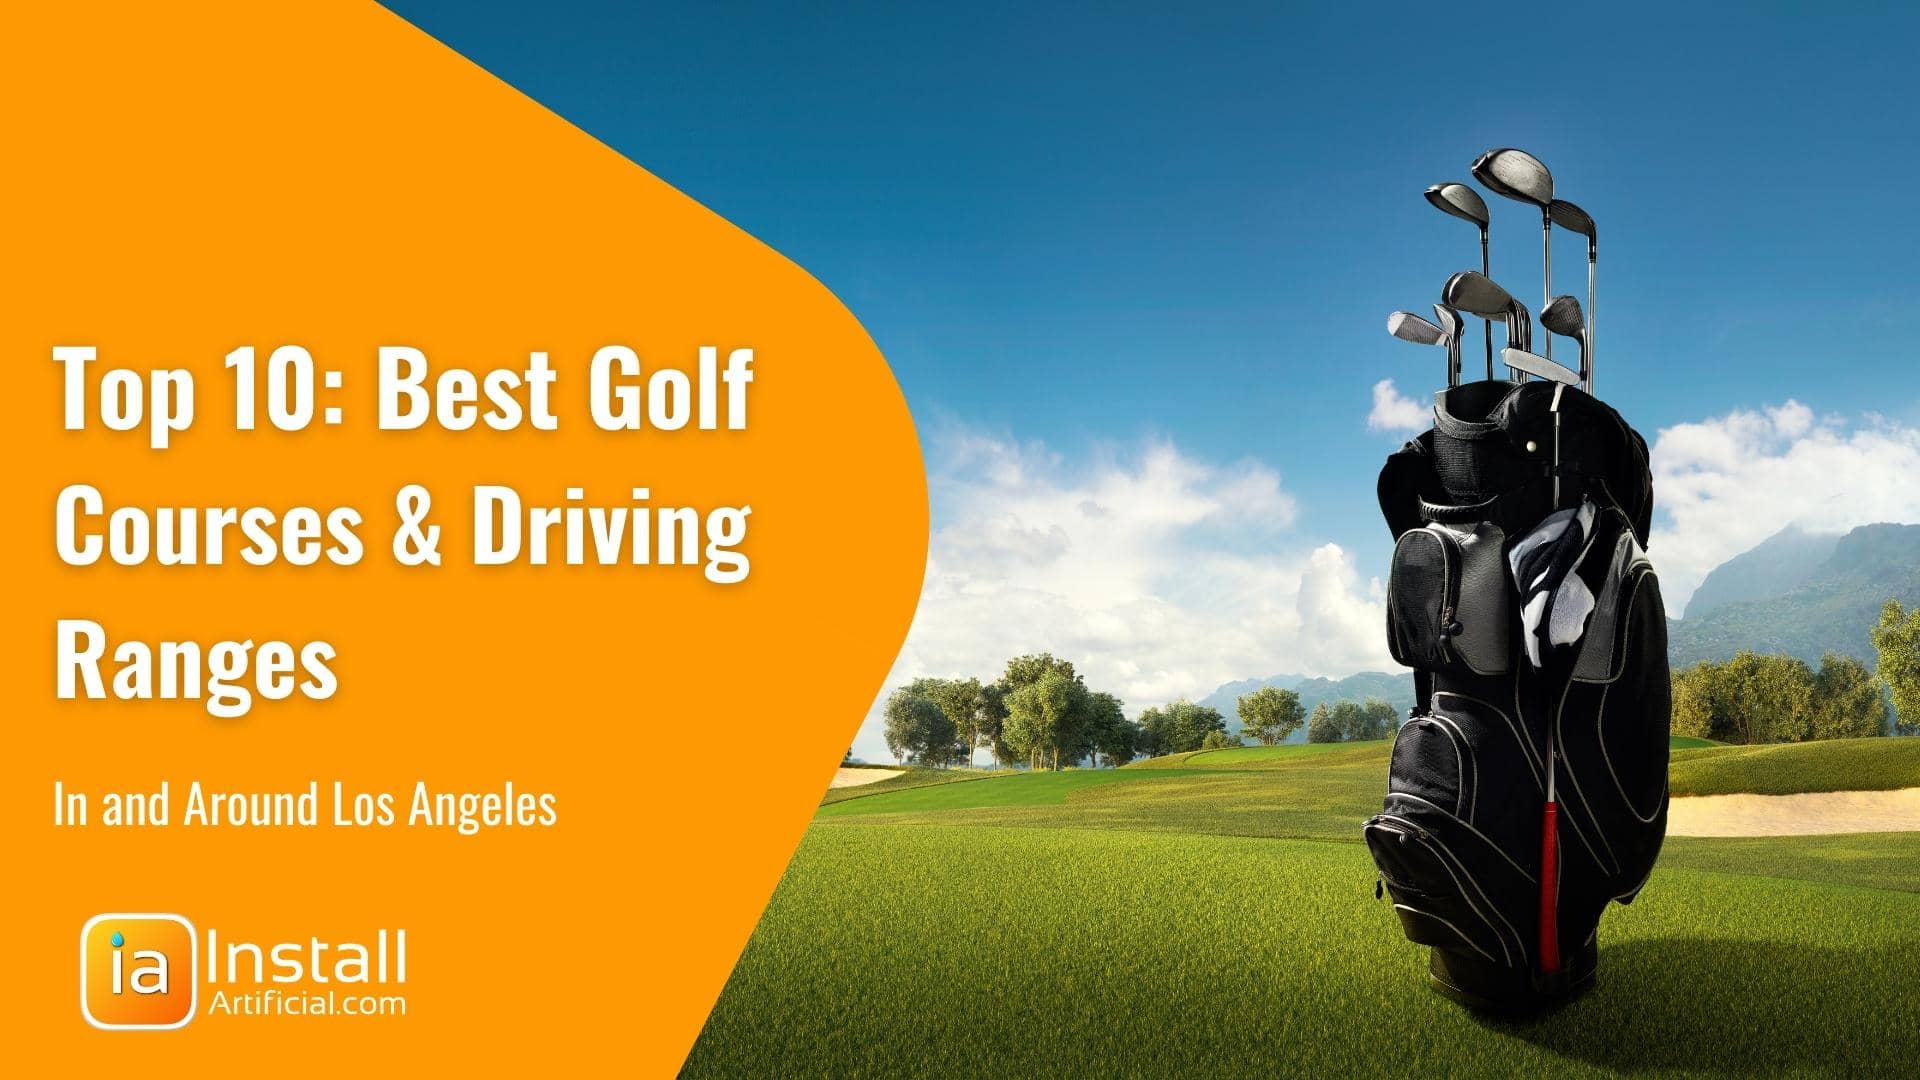 Top Rated Golf Courses and Driving Ranges in Los Angeles California